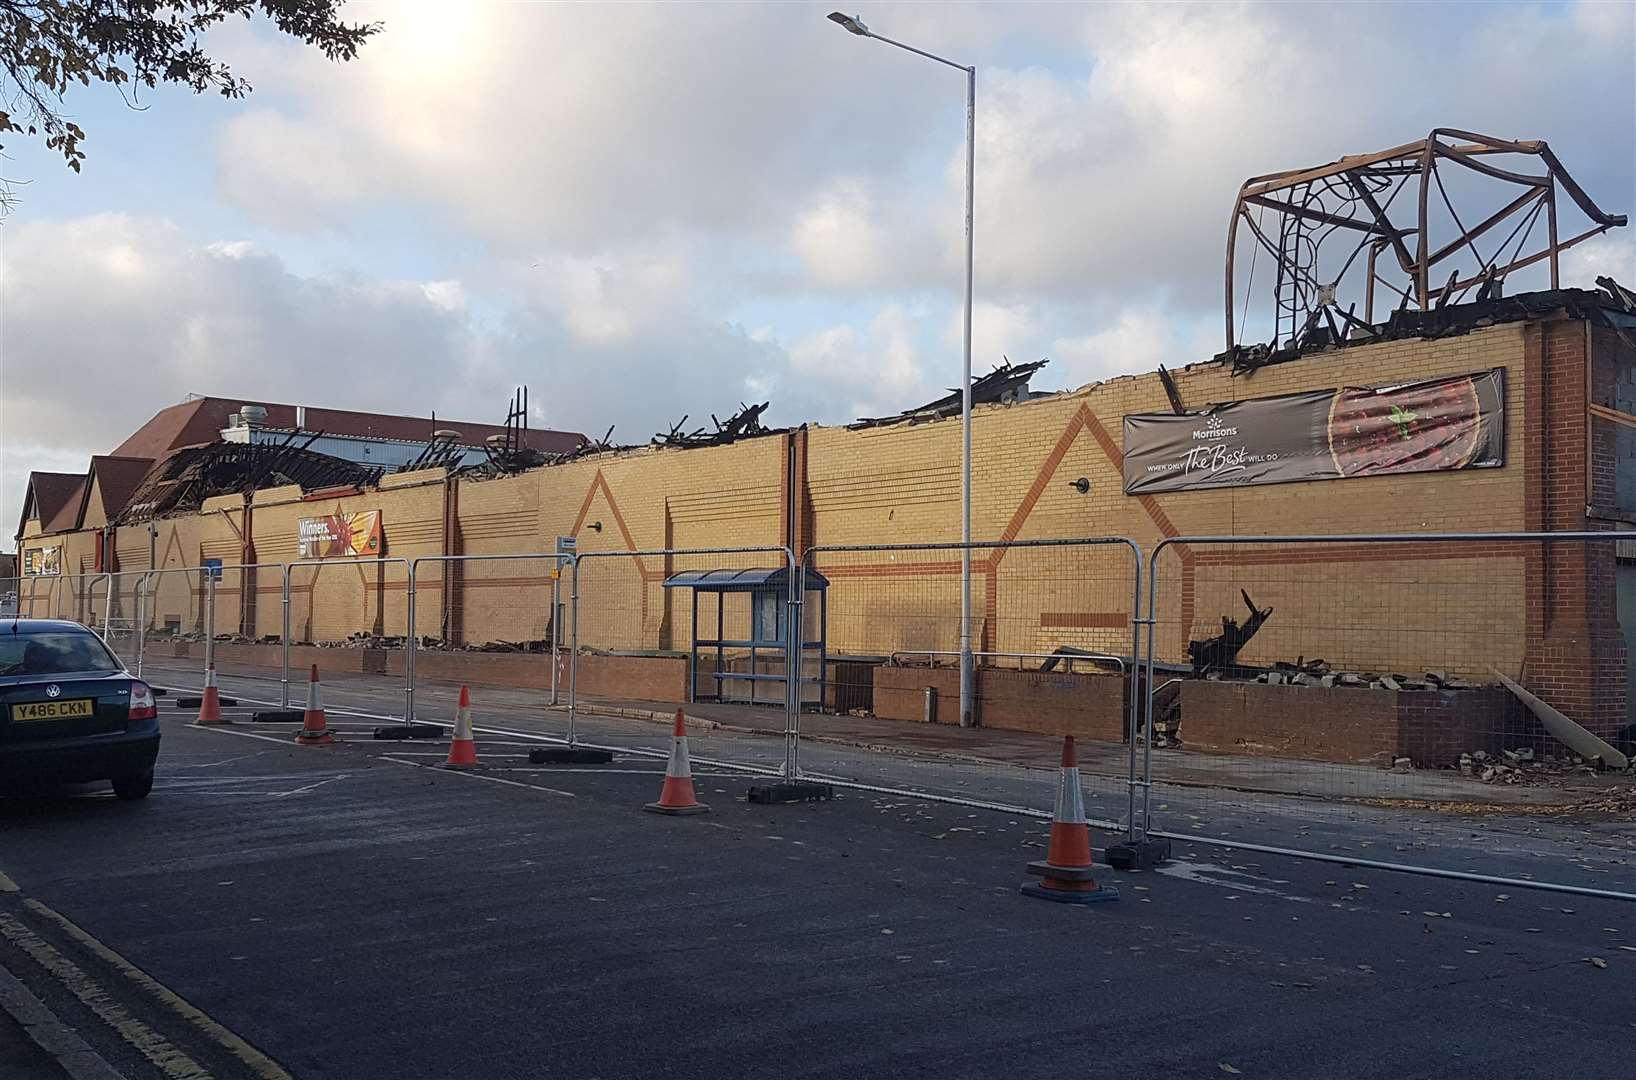 The aftermath of the blaze which tore through the supermarket